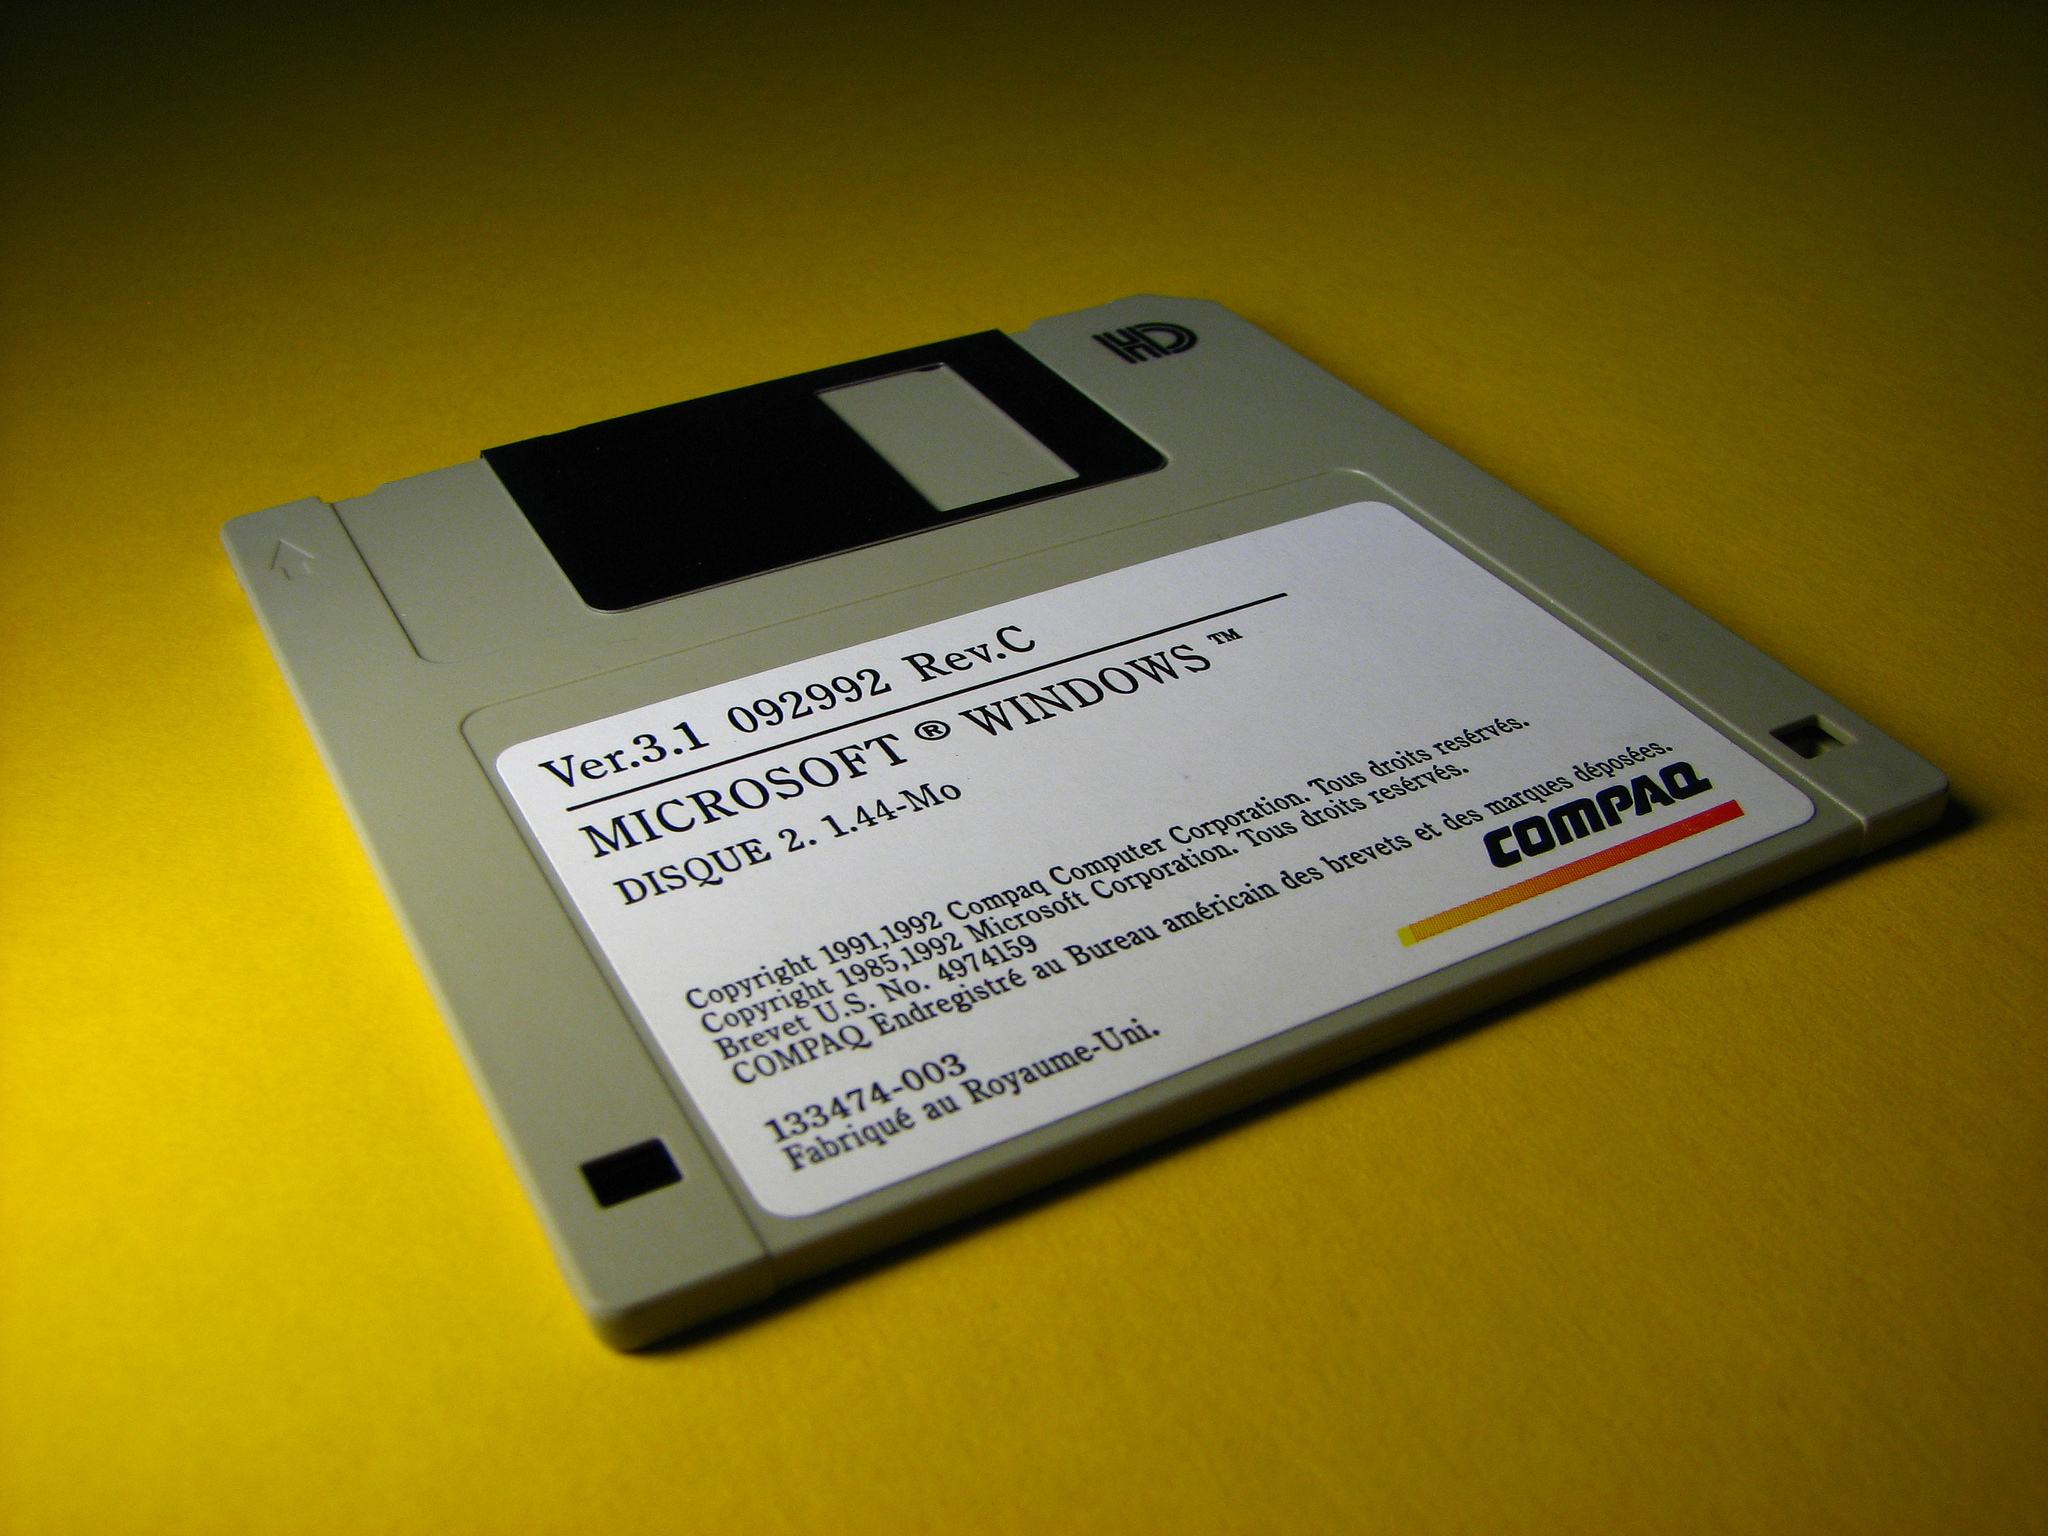 Yes, this disk is in French. (fdecomite)